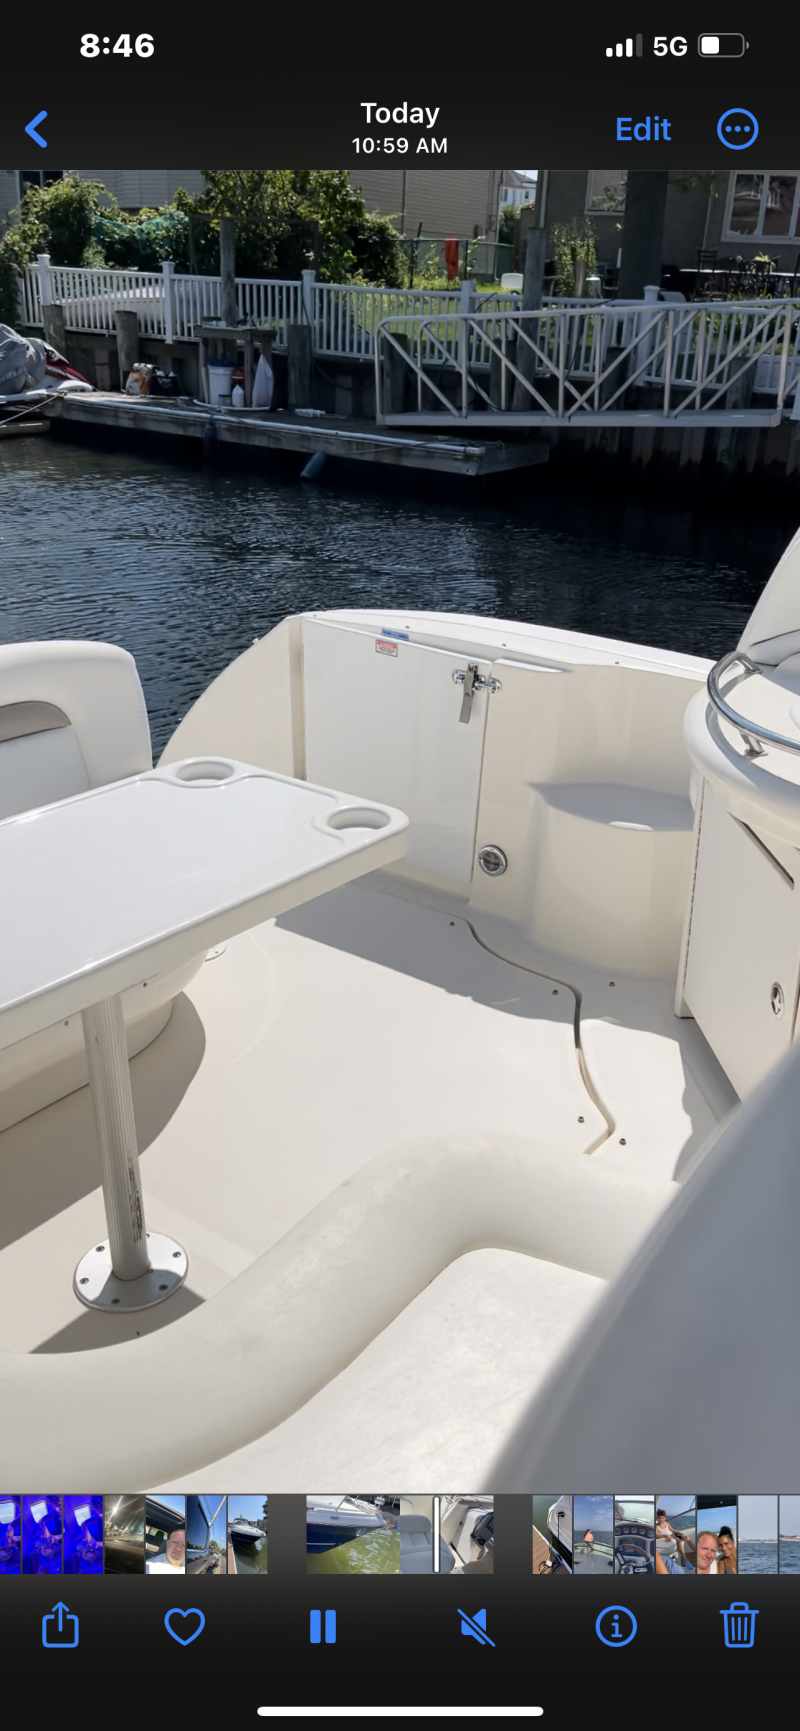 2004 Sea Ray 340 Power boat for sale in Rockville Centre, NY - image 9 